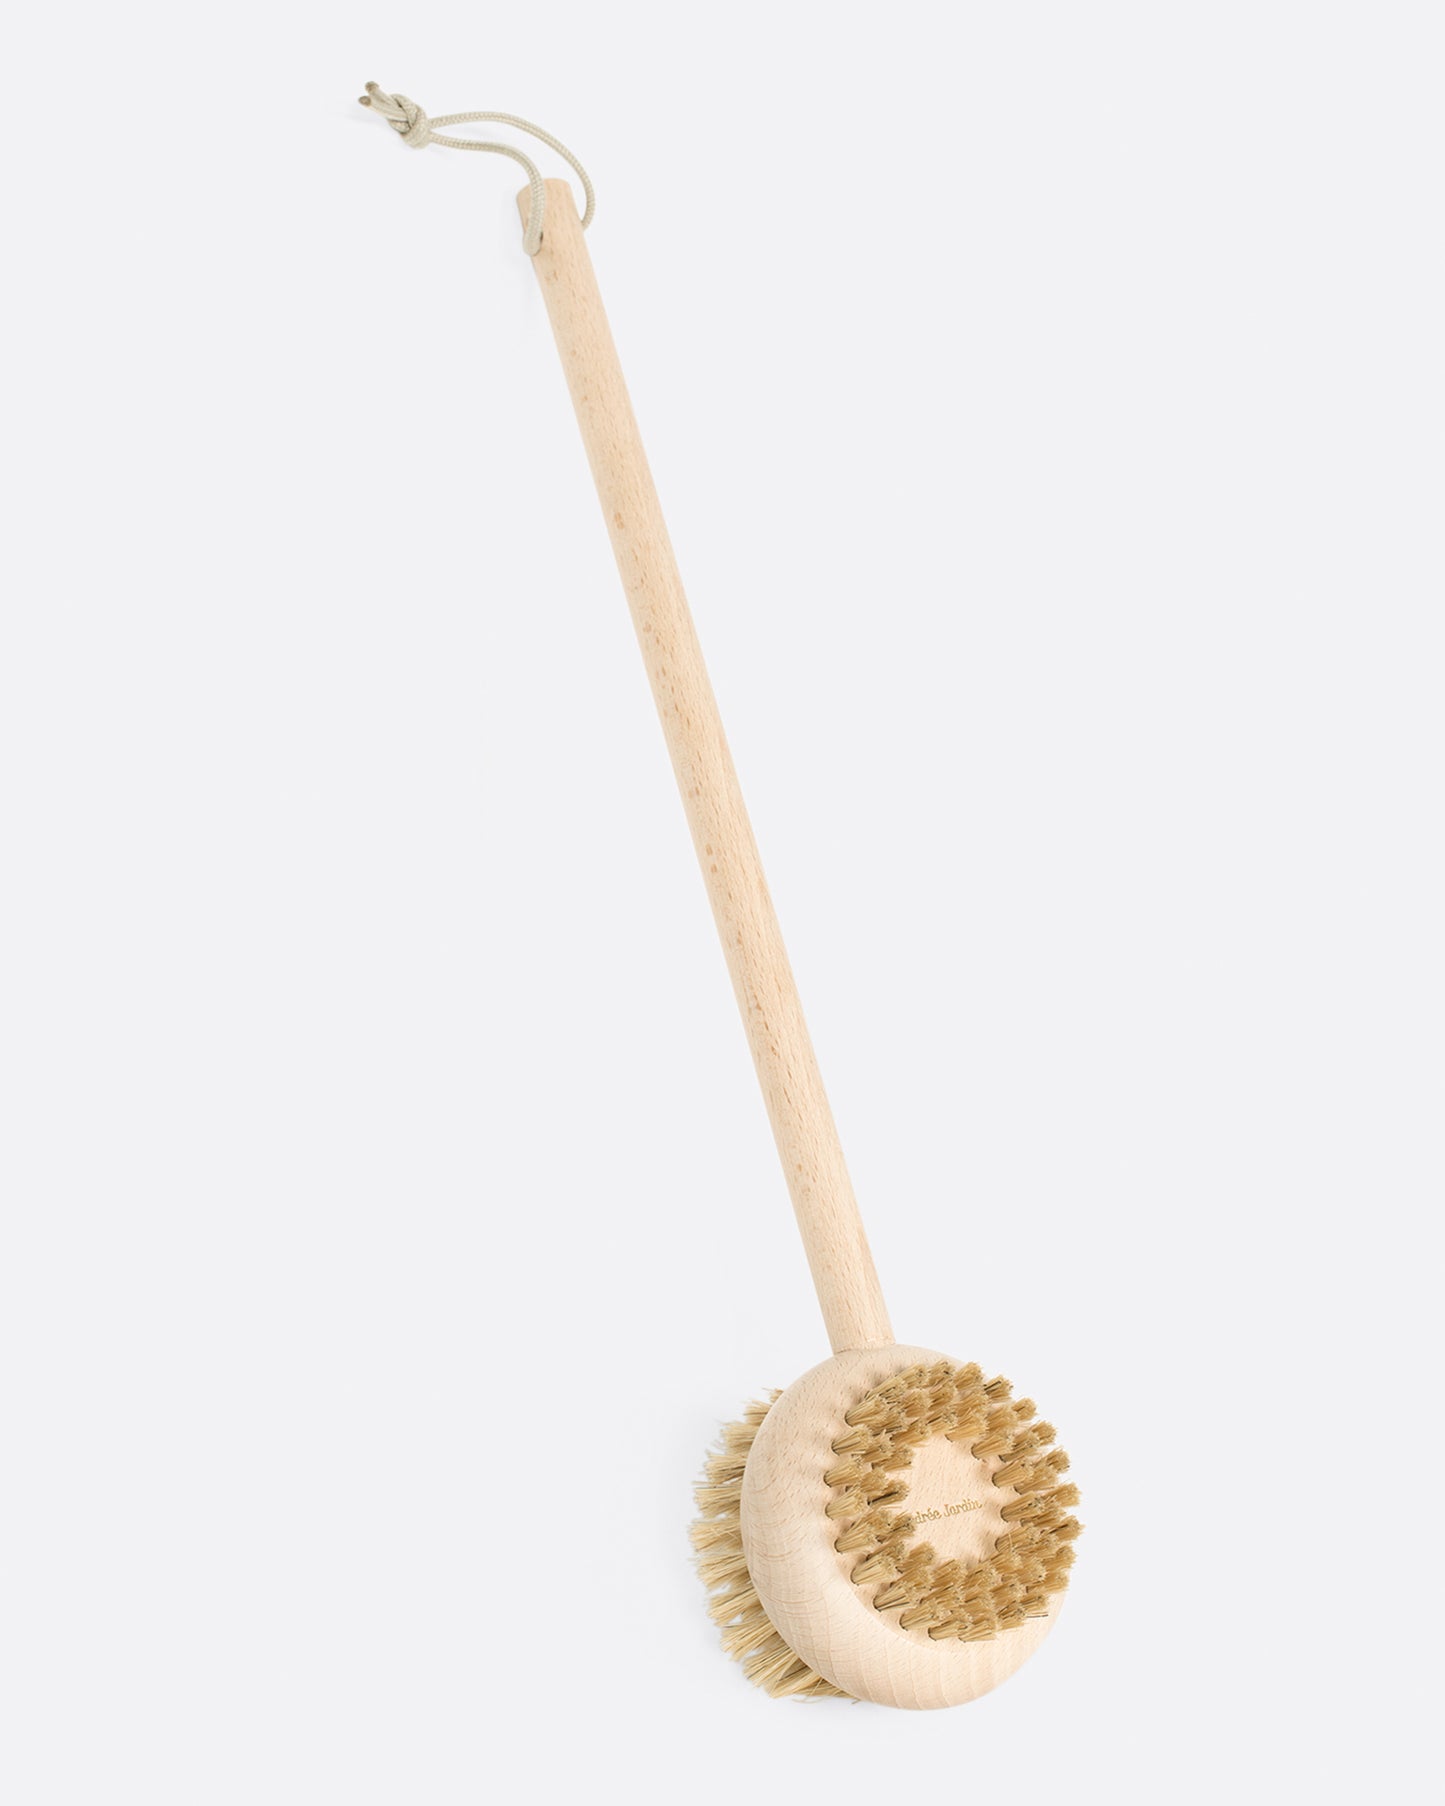 A round beechwood body brush with bristles on both sides, shown standing.